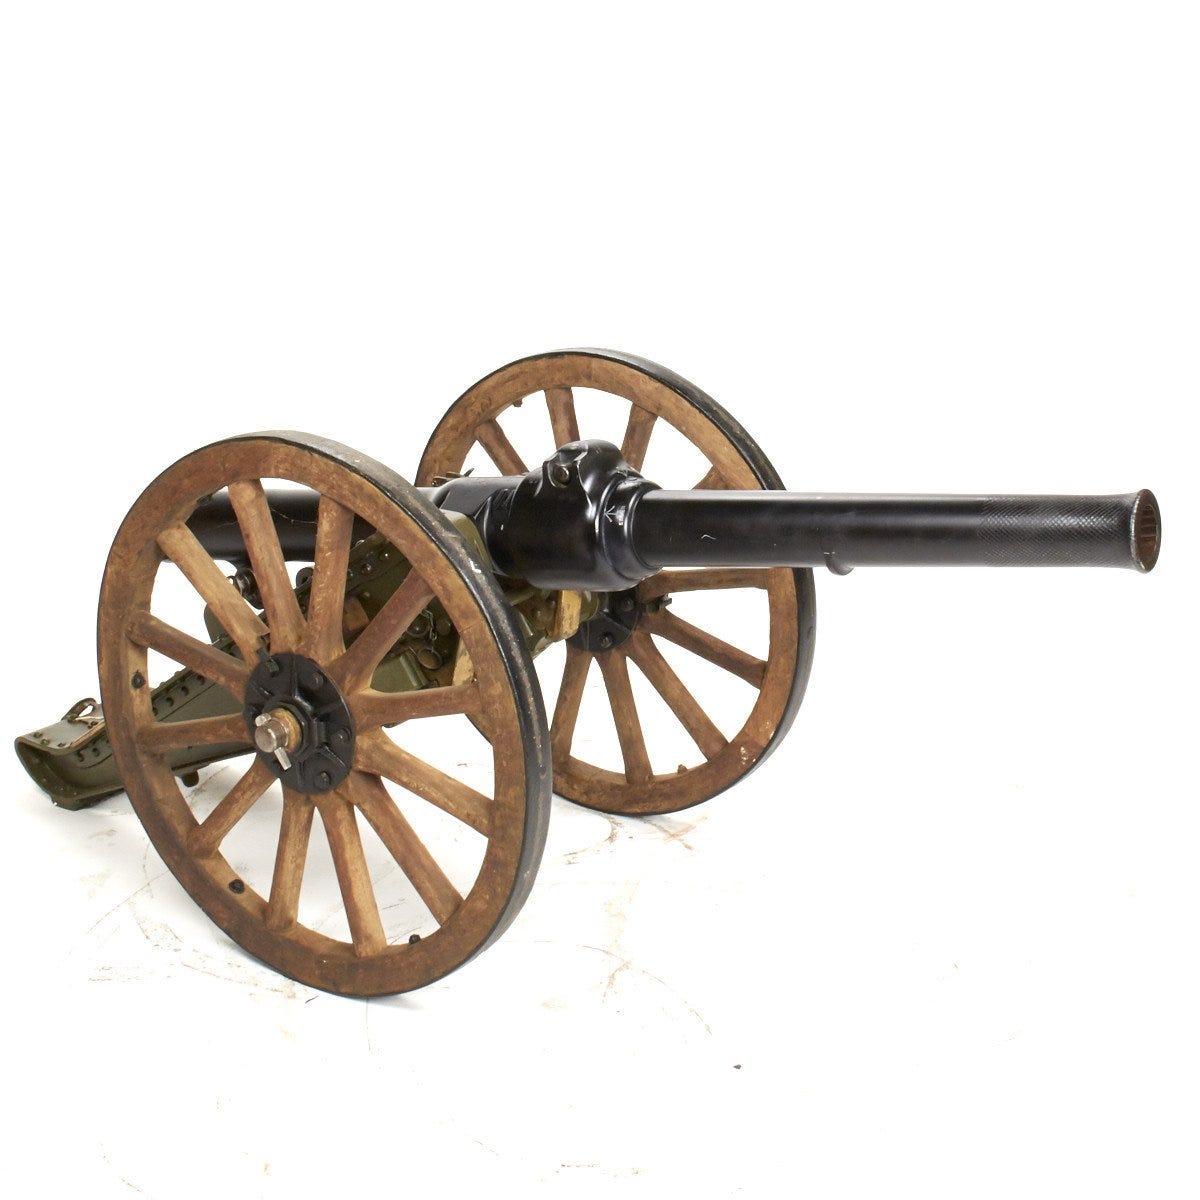 An image of a British RML 2.5 inch Jointed Mountain Cannon.